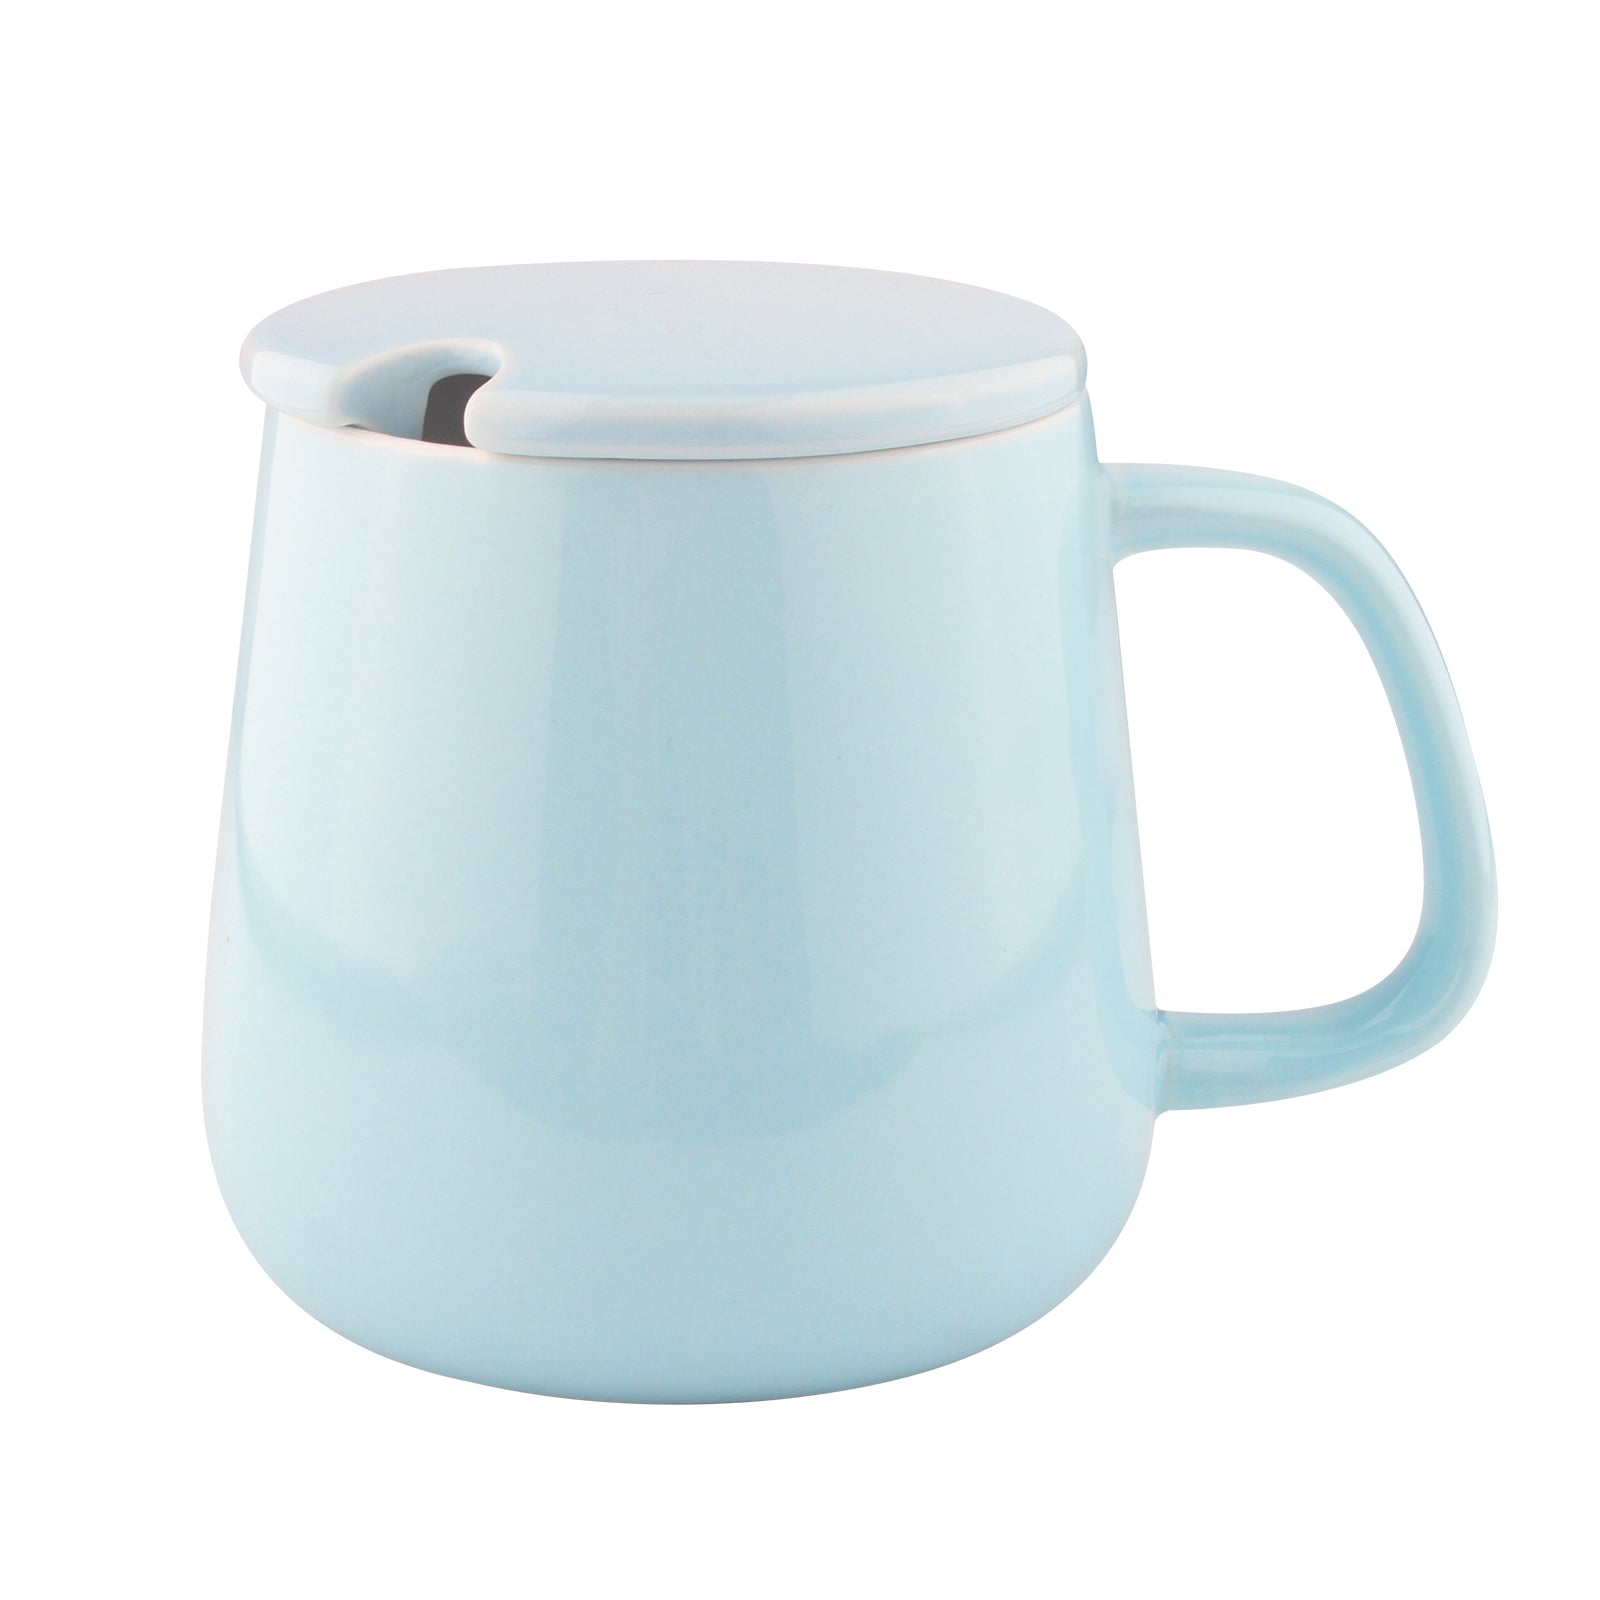 VOBAGA 14 oz Tea Cups Warming Coffee Mugs with Handle, Perfect for Espresso, Latte, Cappuccino (Blue)